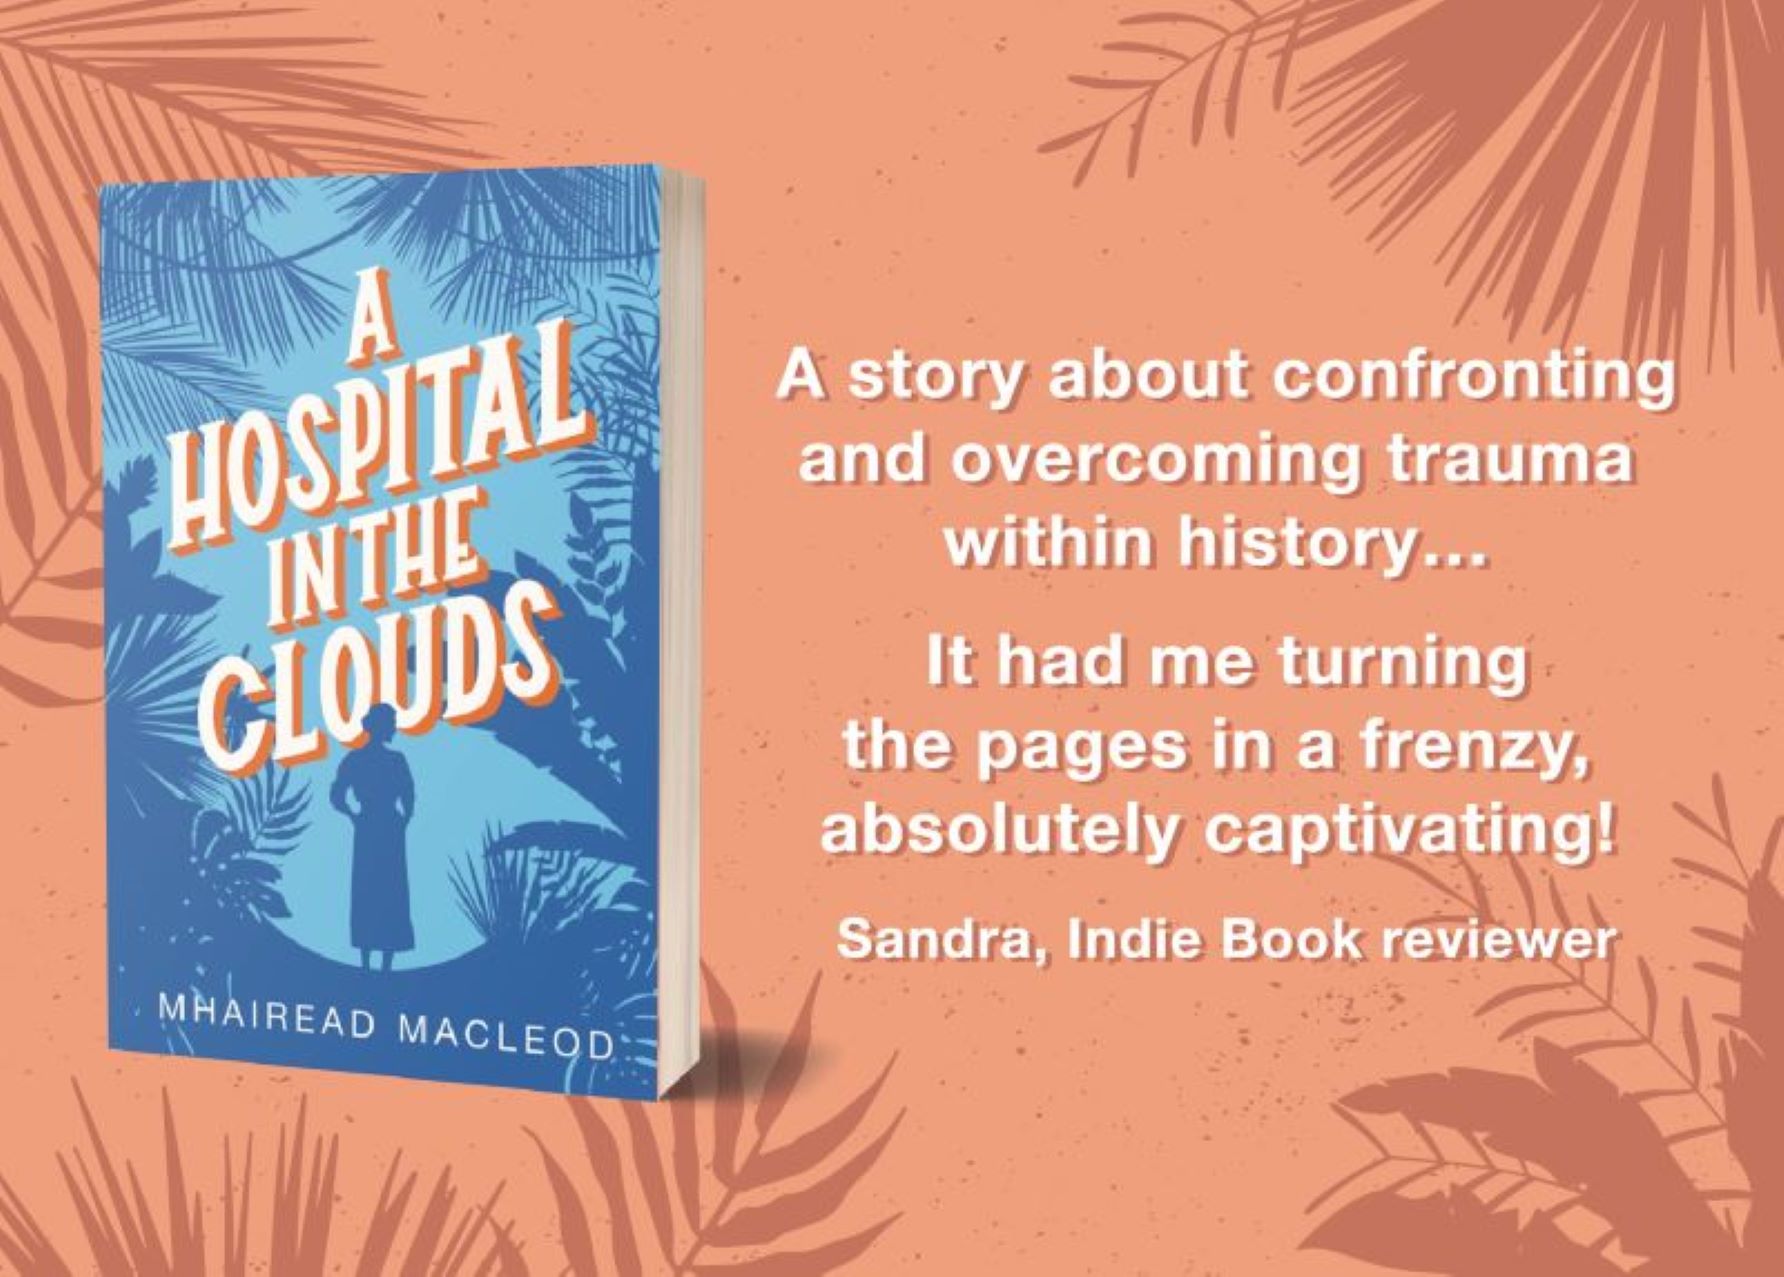 A Hospital In the Clouds Promo Card.jpg